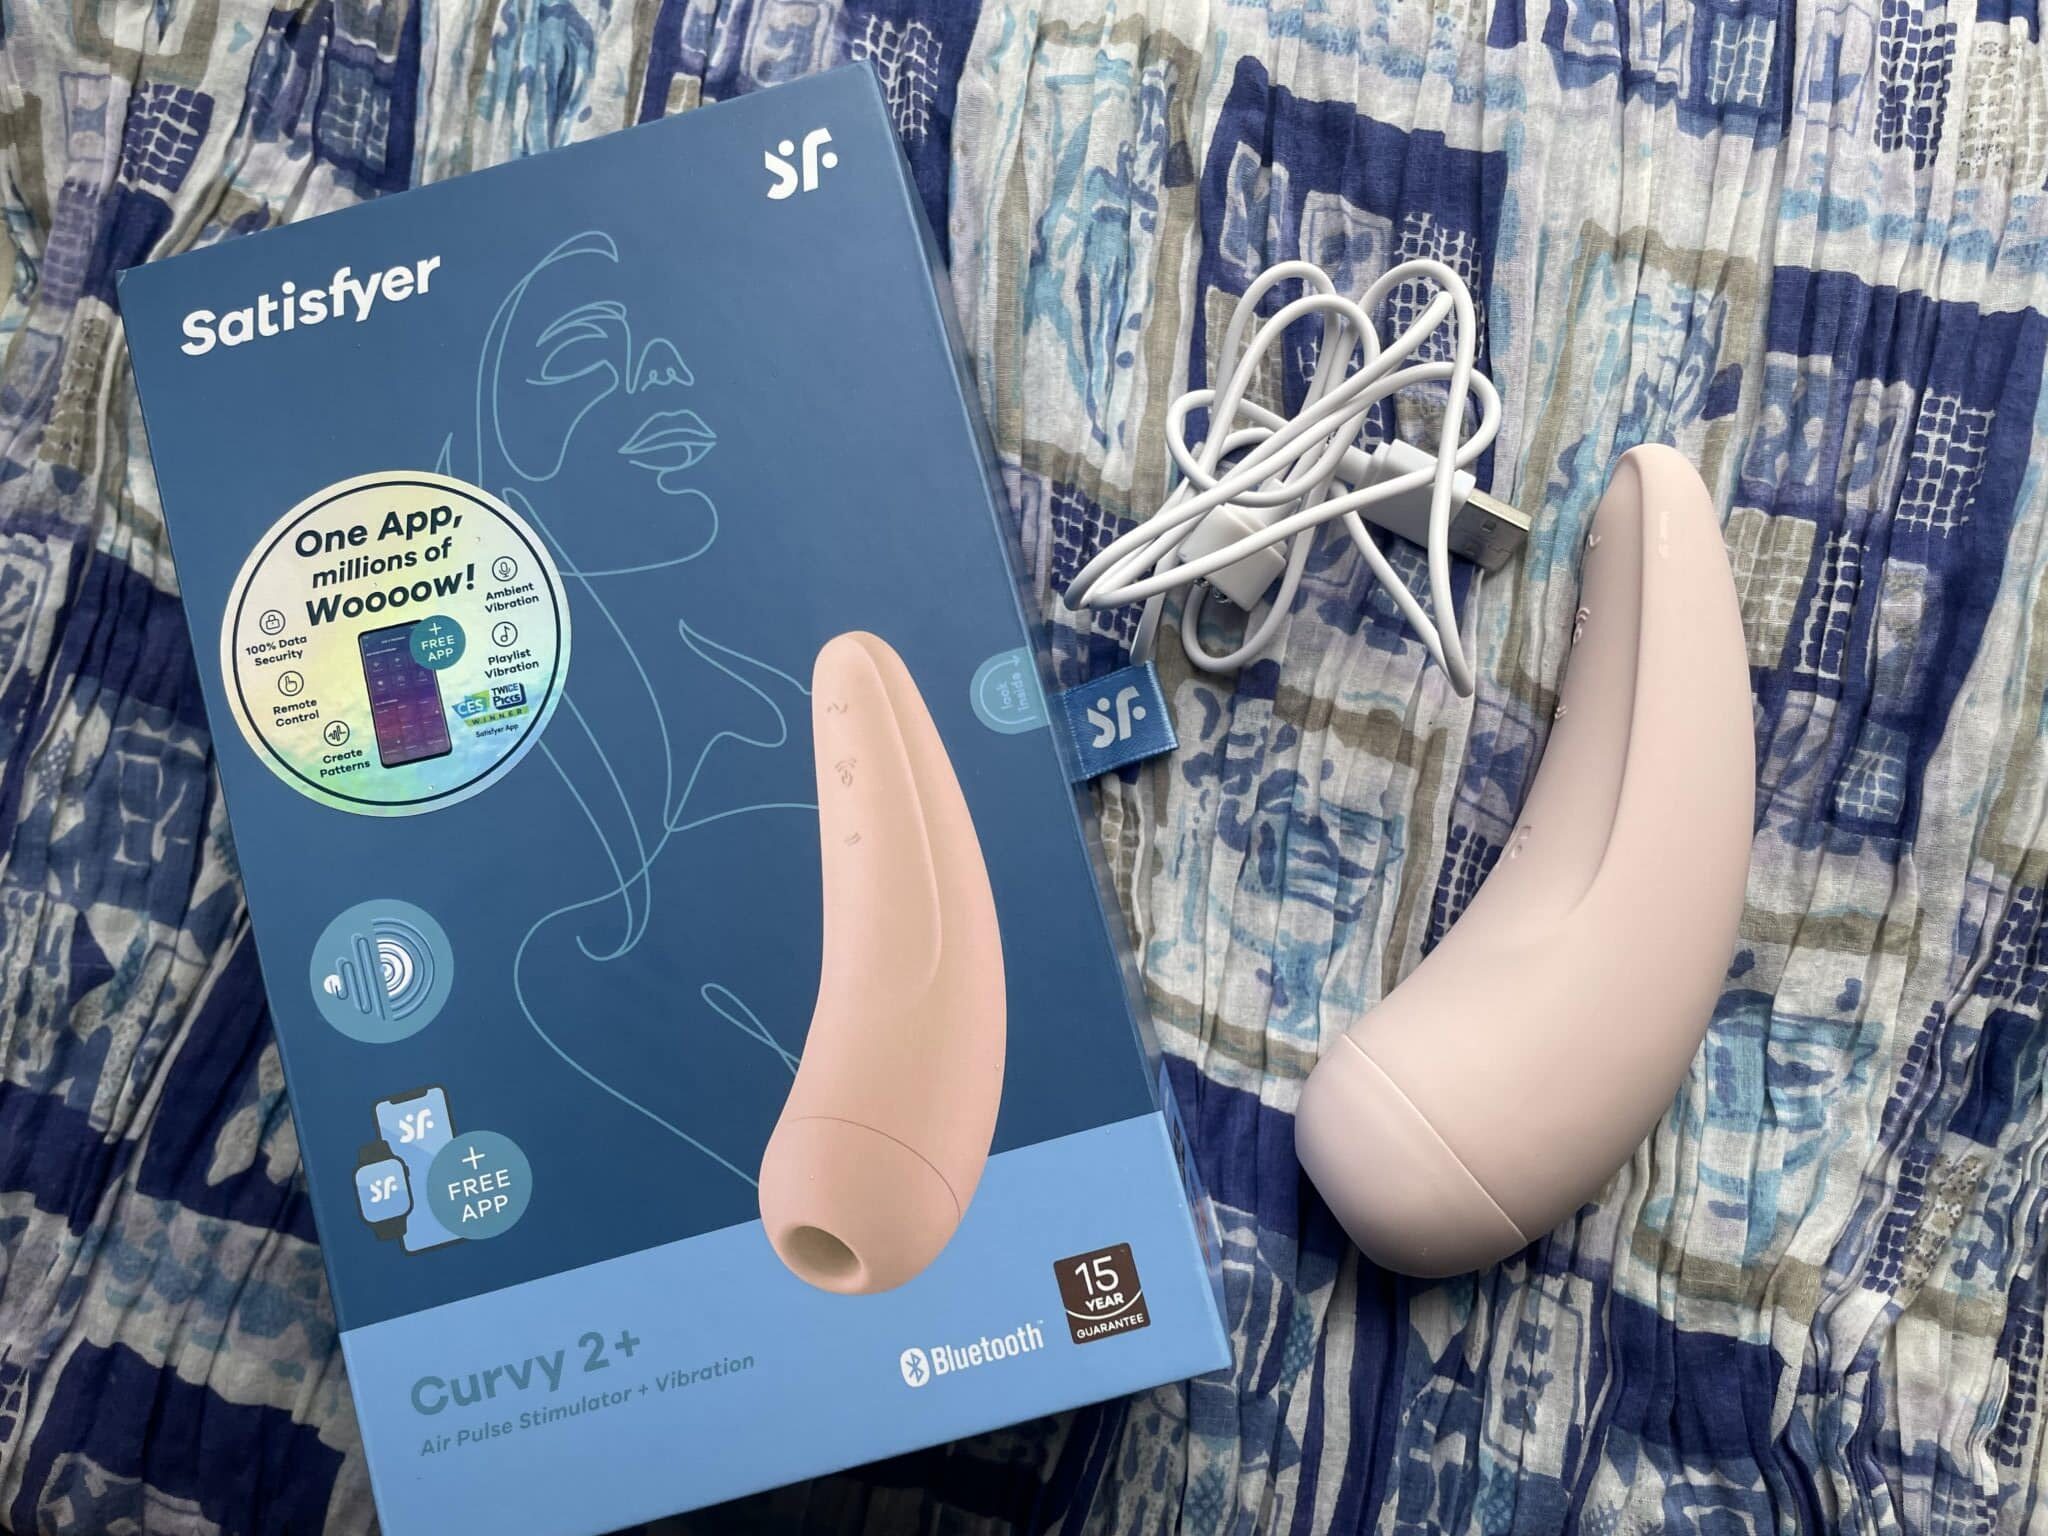 Satisfyer Curvy 2+ My unboxing experience